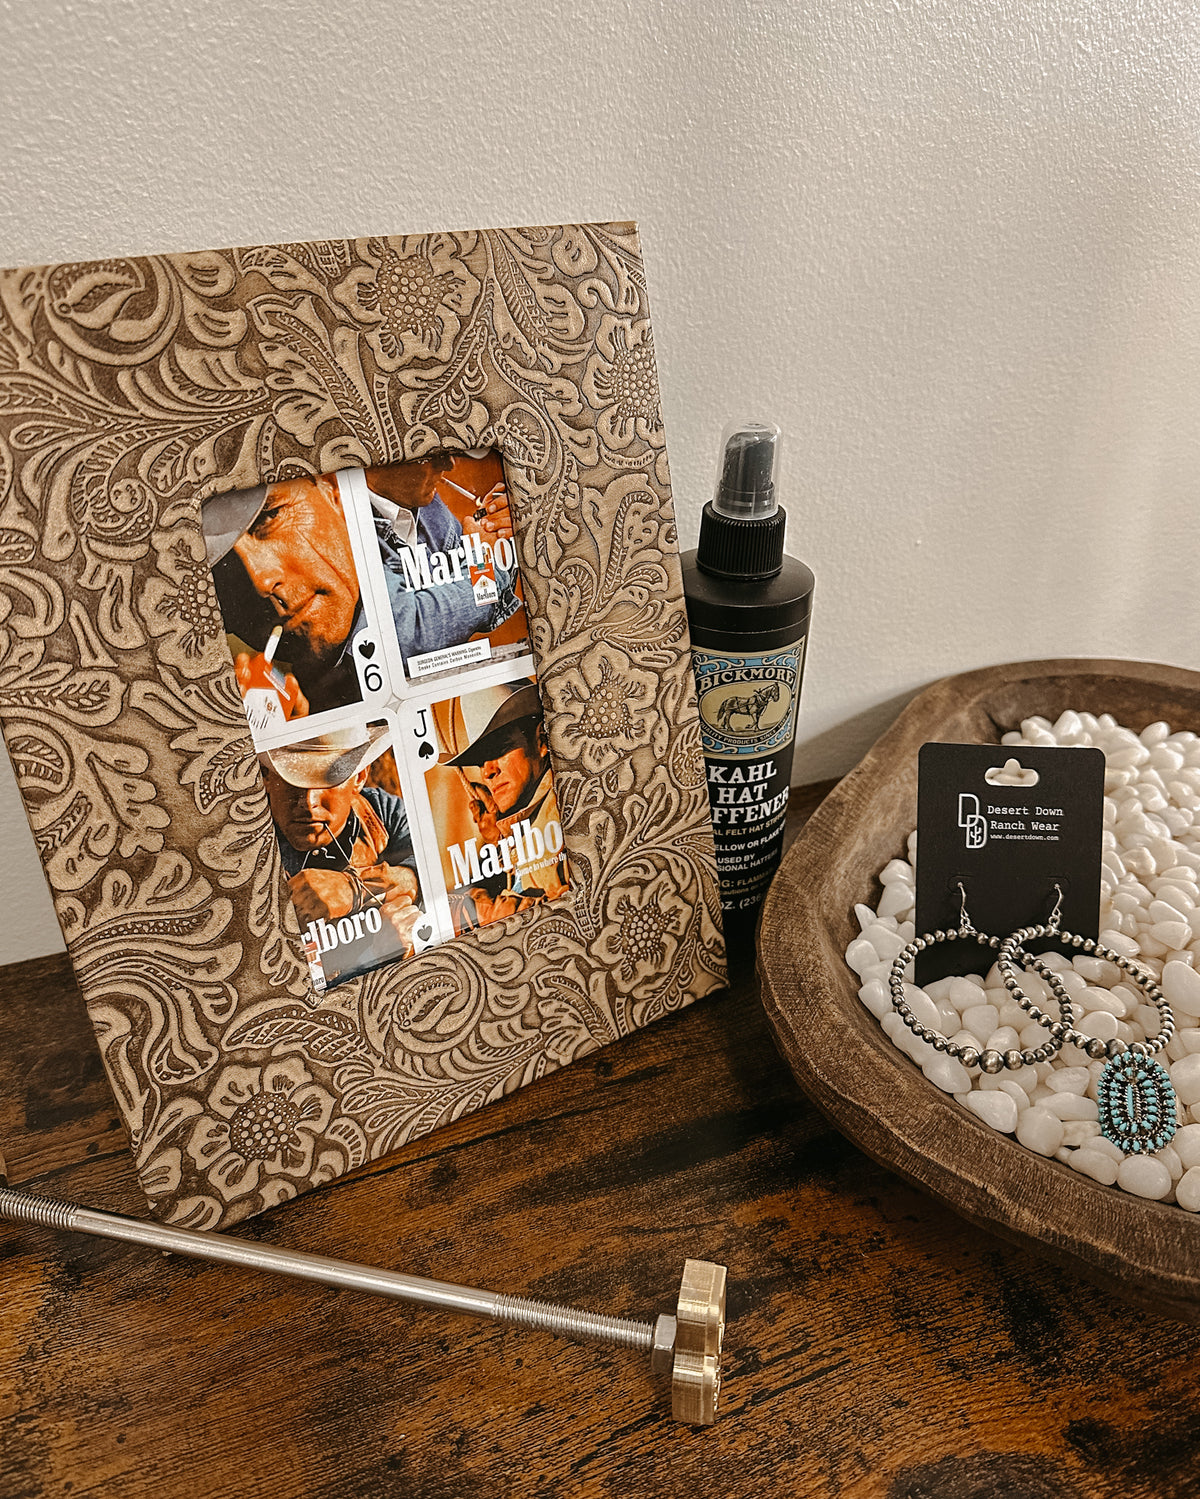 Tooled Picture Frame